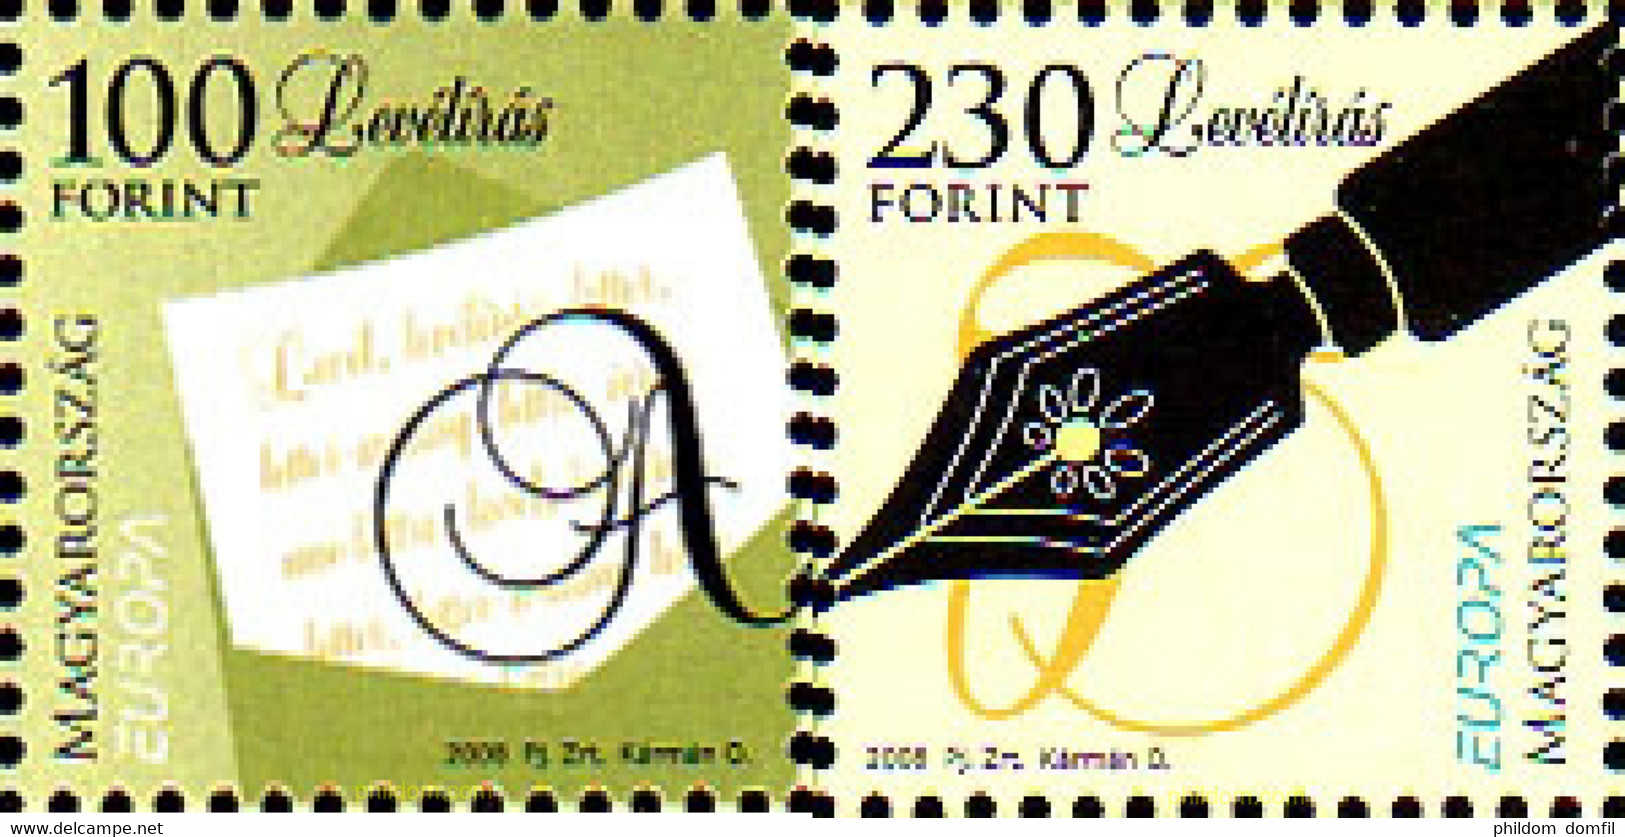 250130 MNH HUNGRIA 2008 EUROPA CEPT 2008 CARTAS - Used Stamps